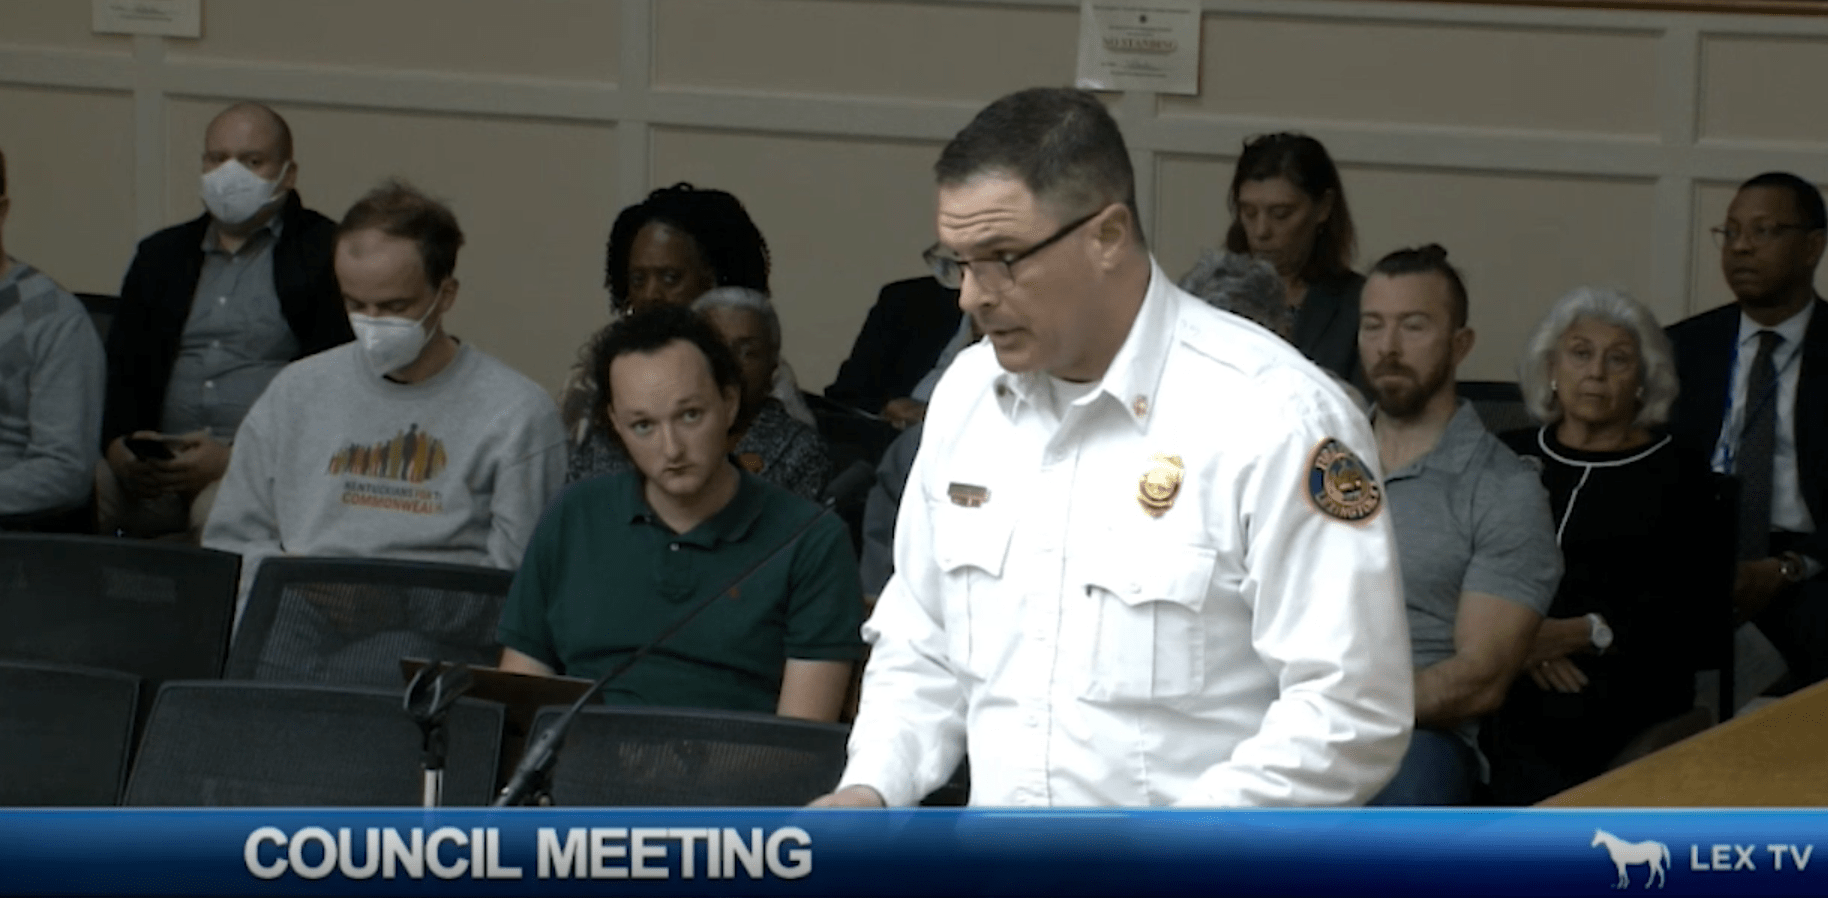 Council approves written reprimand for Lexington firefighter who was involved in at-fault collision while driving ambulance